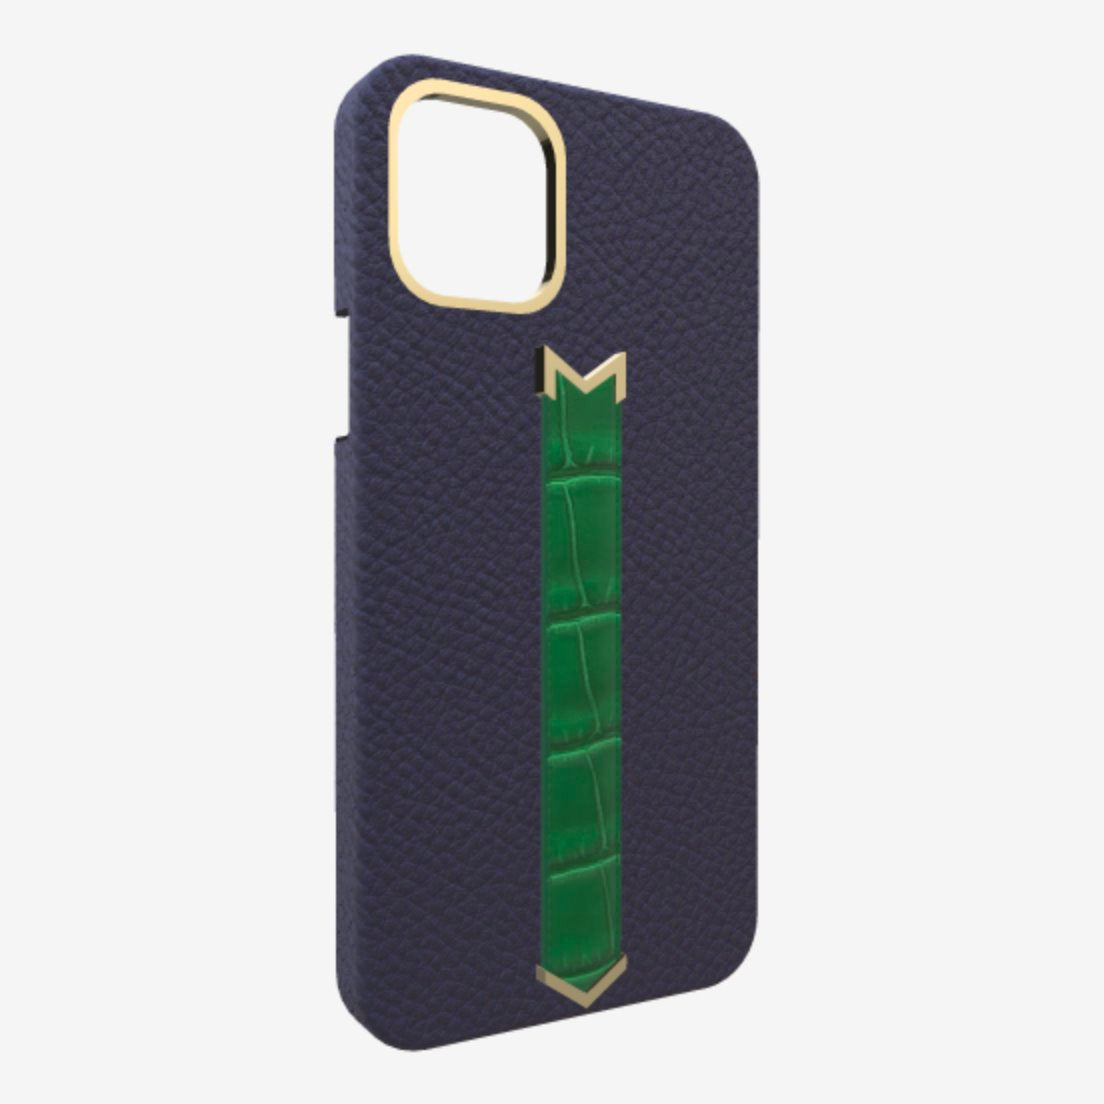 Gold Finger Strap Case for iPhone 13 Pro in Genuine Calfskin and Alligator Navy Blue Emerald Green 